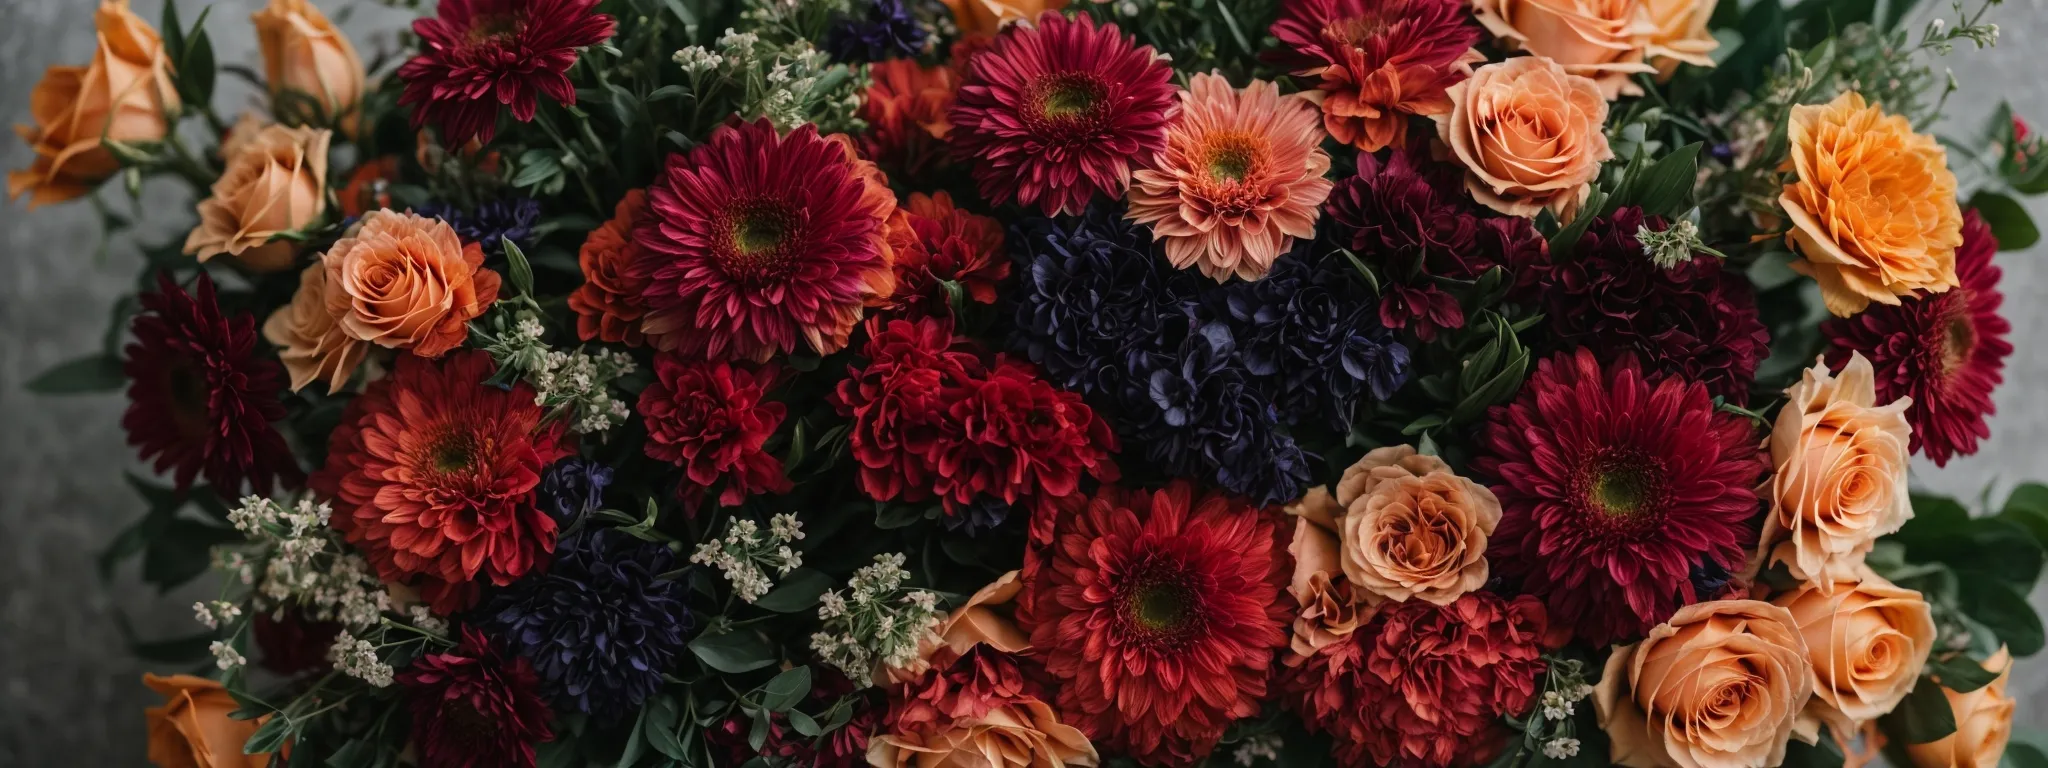 a vibrant bouquet of flowers showcasing contrasting hues stands out against a muted background.